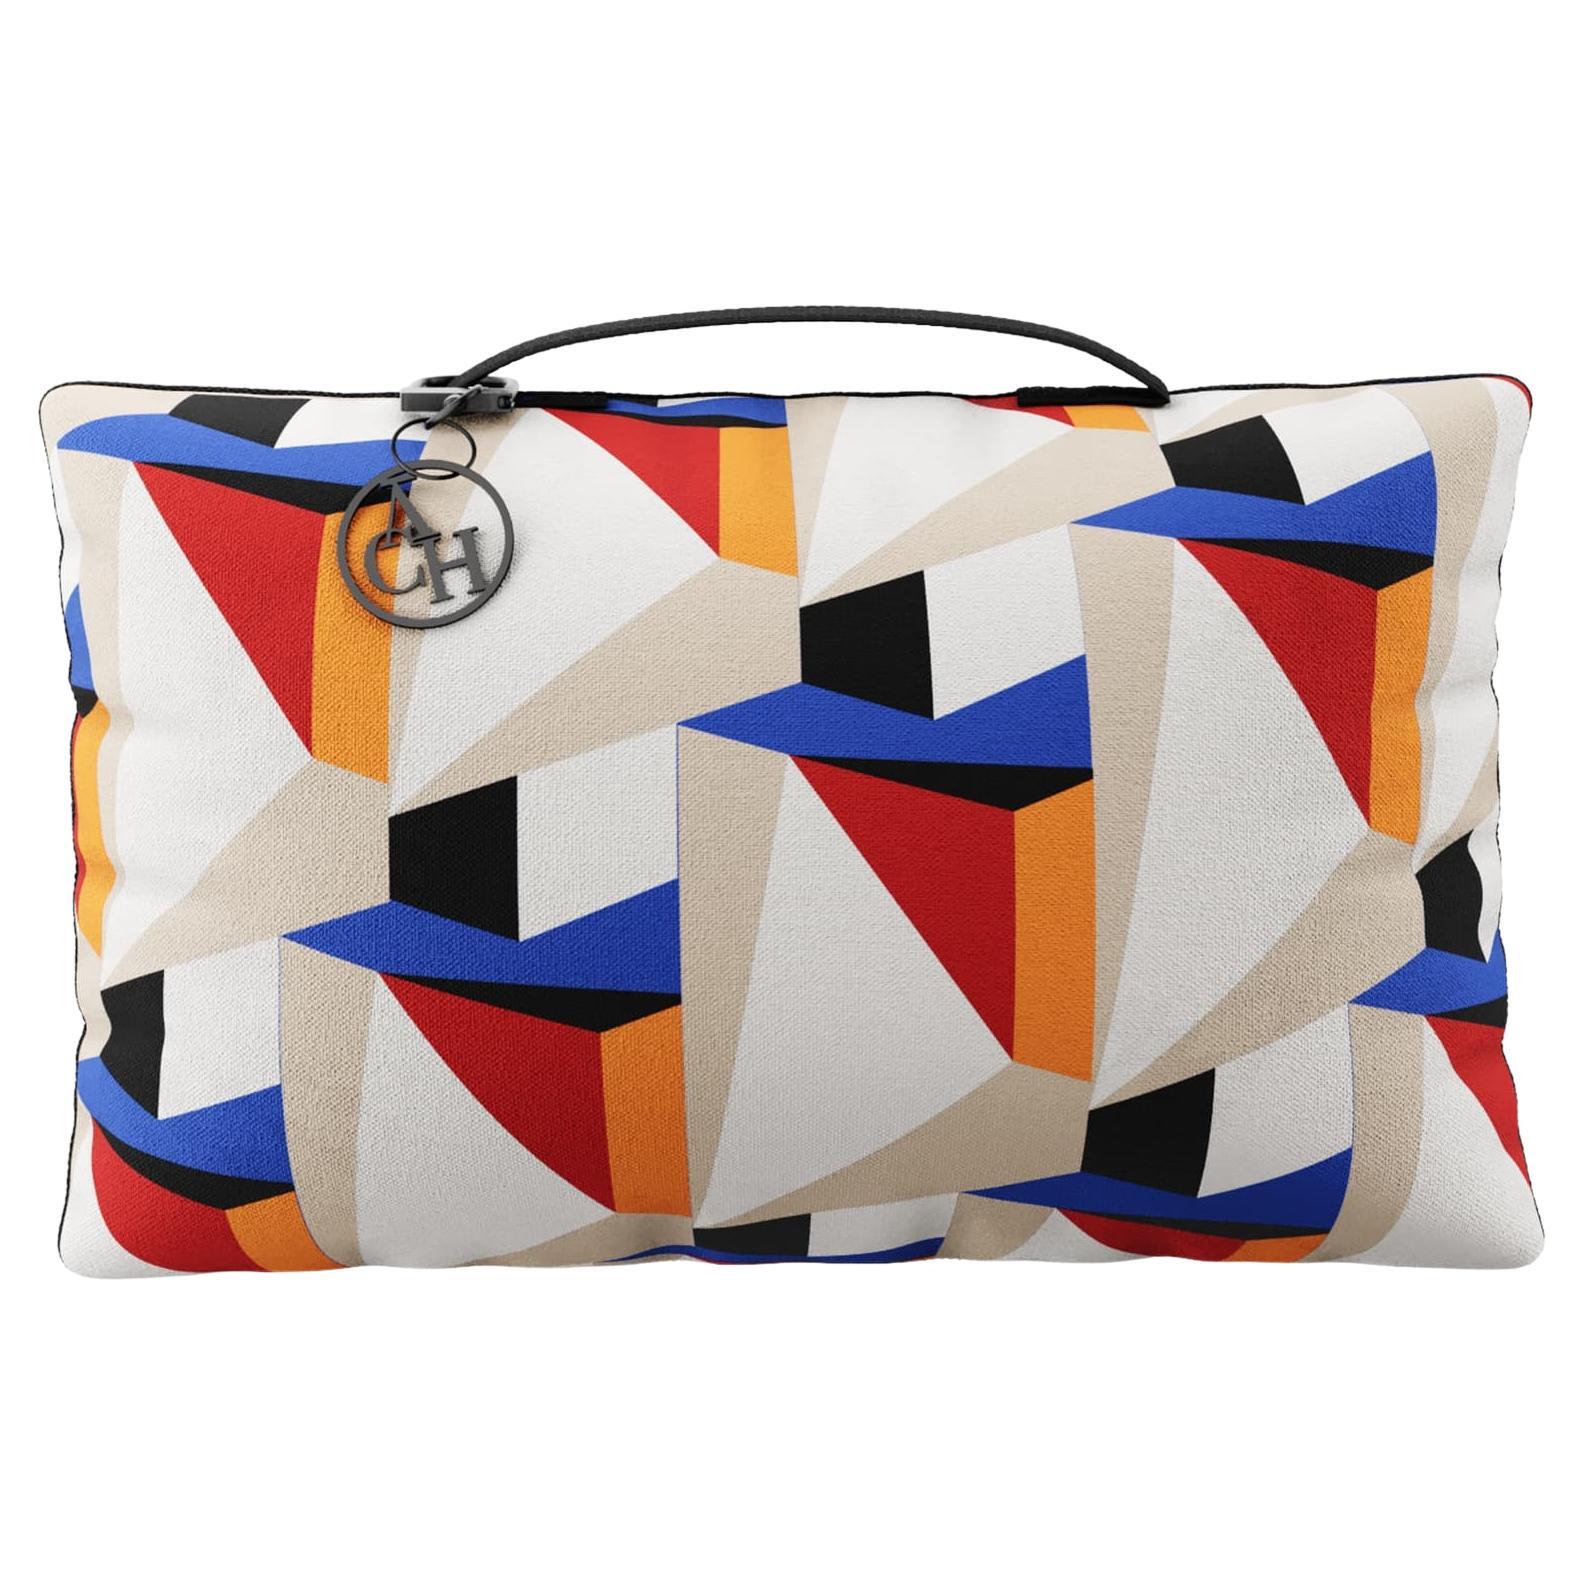 Primary Cubism Rectangle Pillow, Modern Eye-Catching Cushion